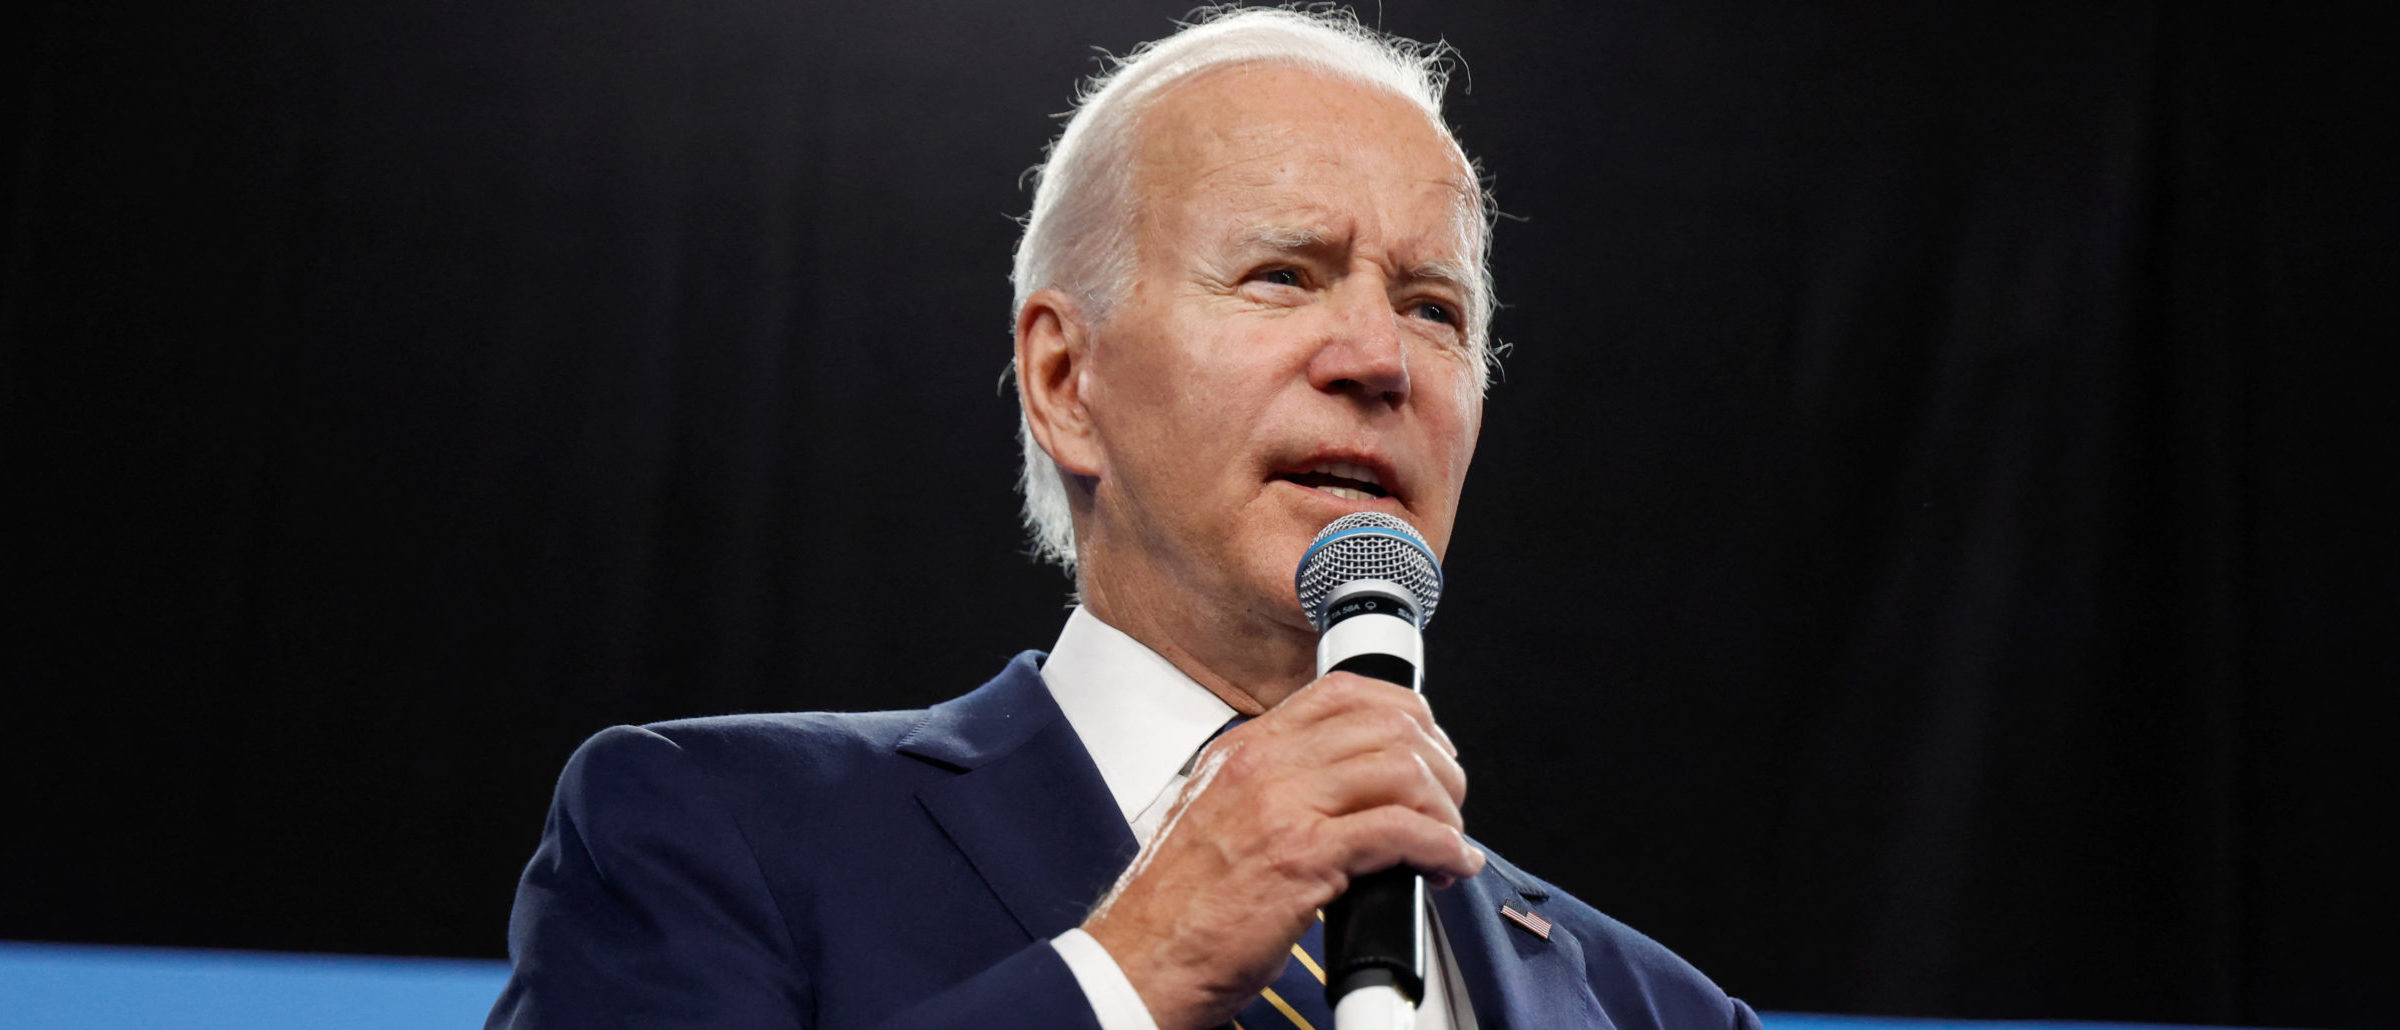 Biden Administration Seems Content With High Gas Prices As Americans’ Wallets Take A Hit thumbnail